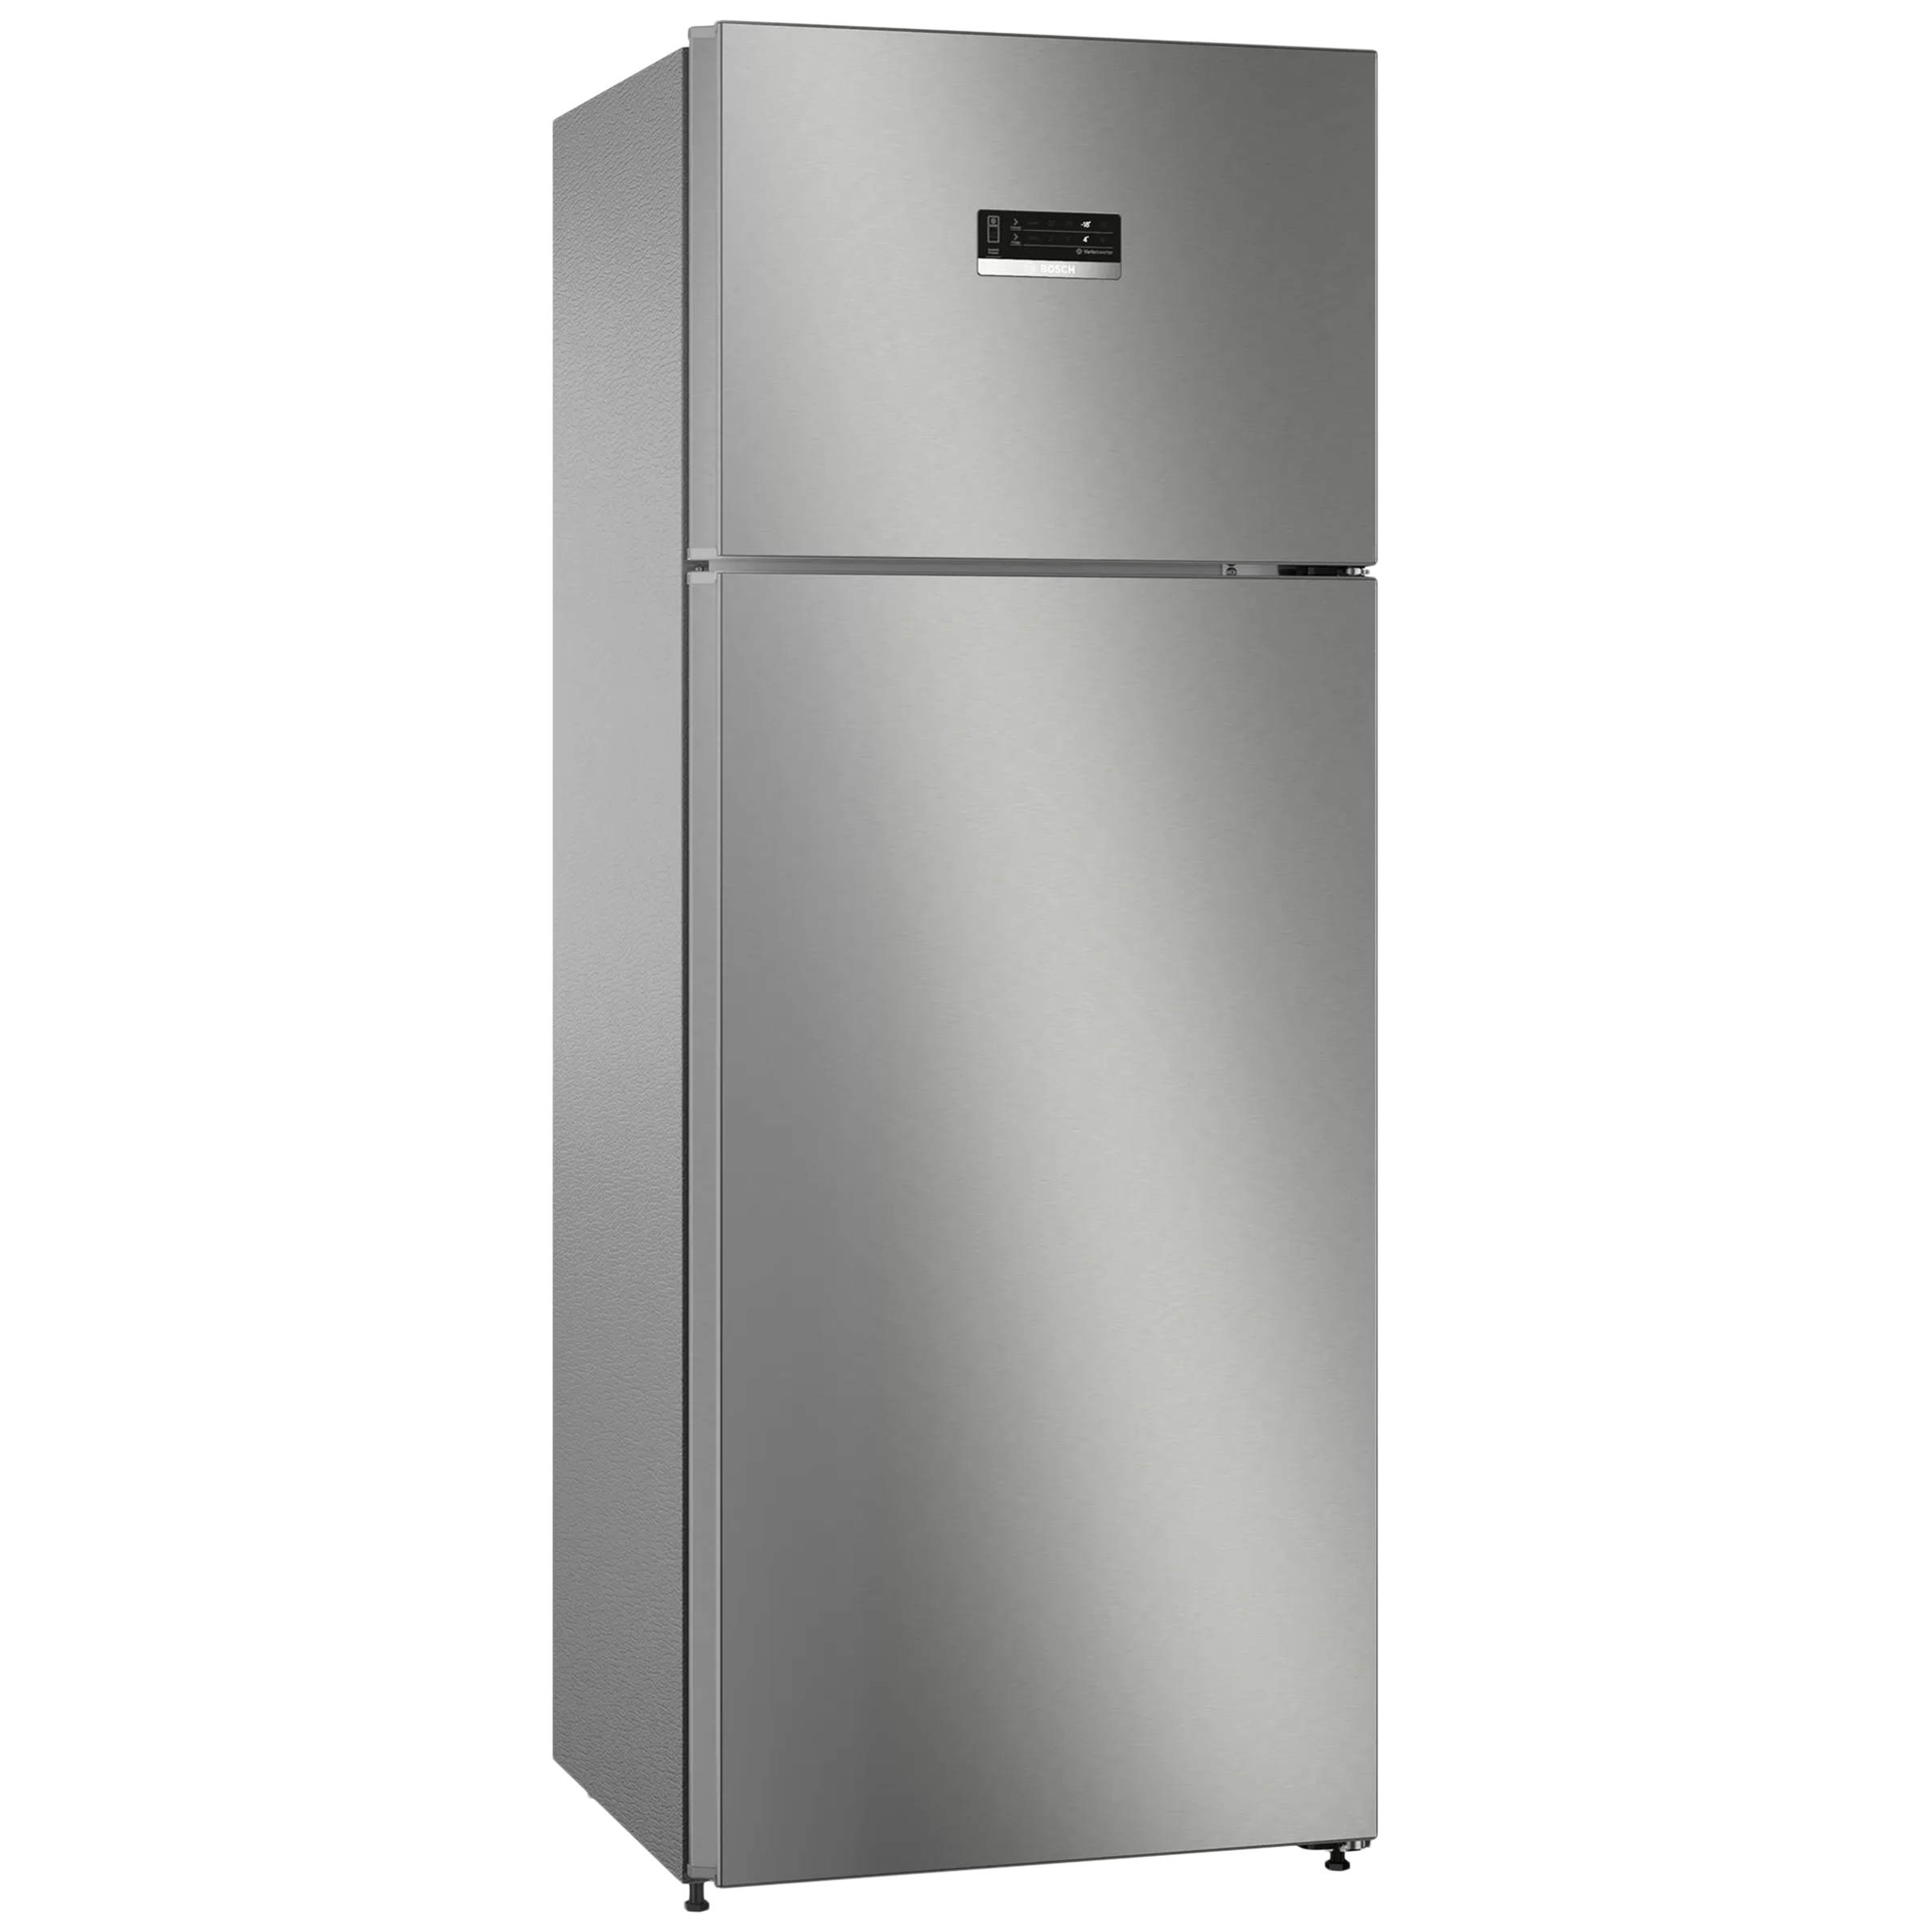 Bosch Series 4 334 Litres 3 Star Frost Free Double Door Convertible Refrigerator with Temperature Display (CTC35S032I, Sparkly Steel)_1